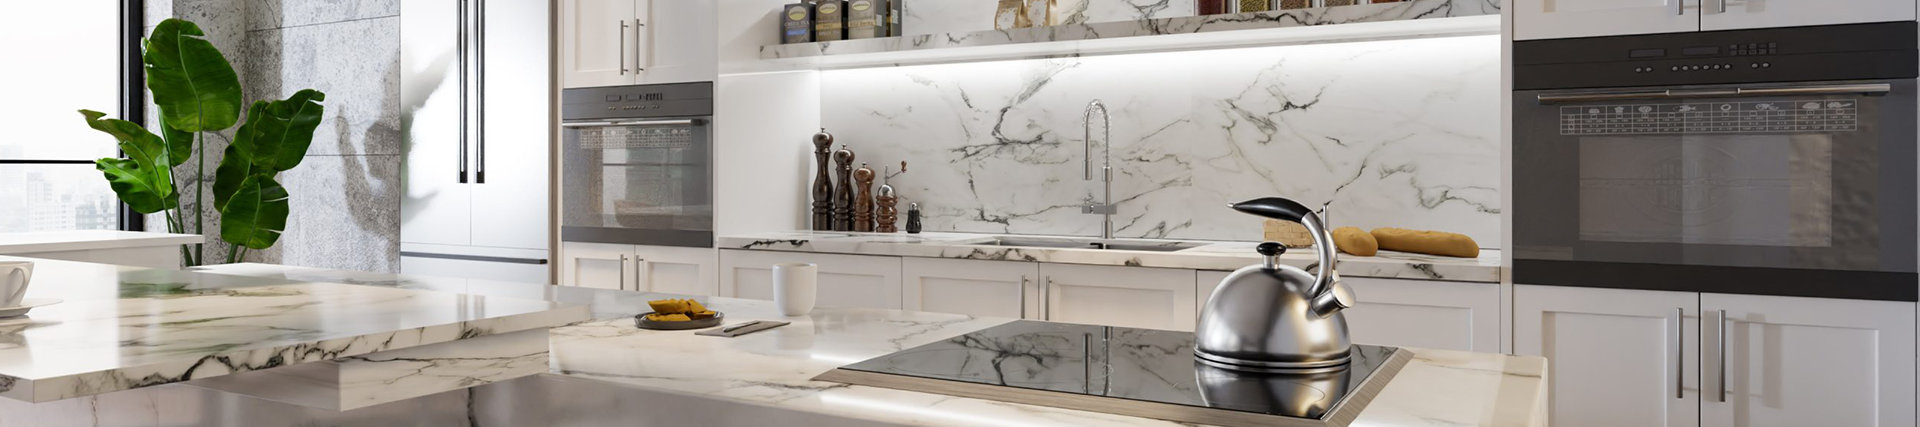 Countertop Products and Services